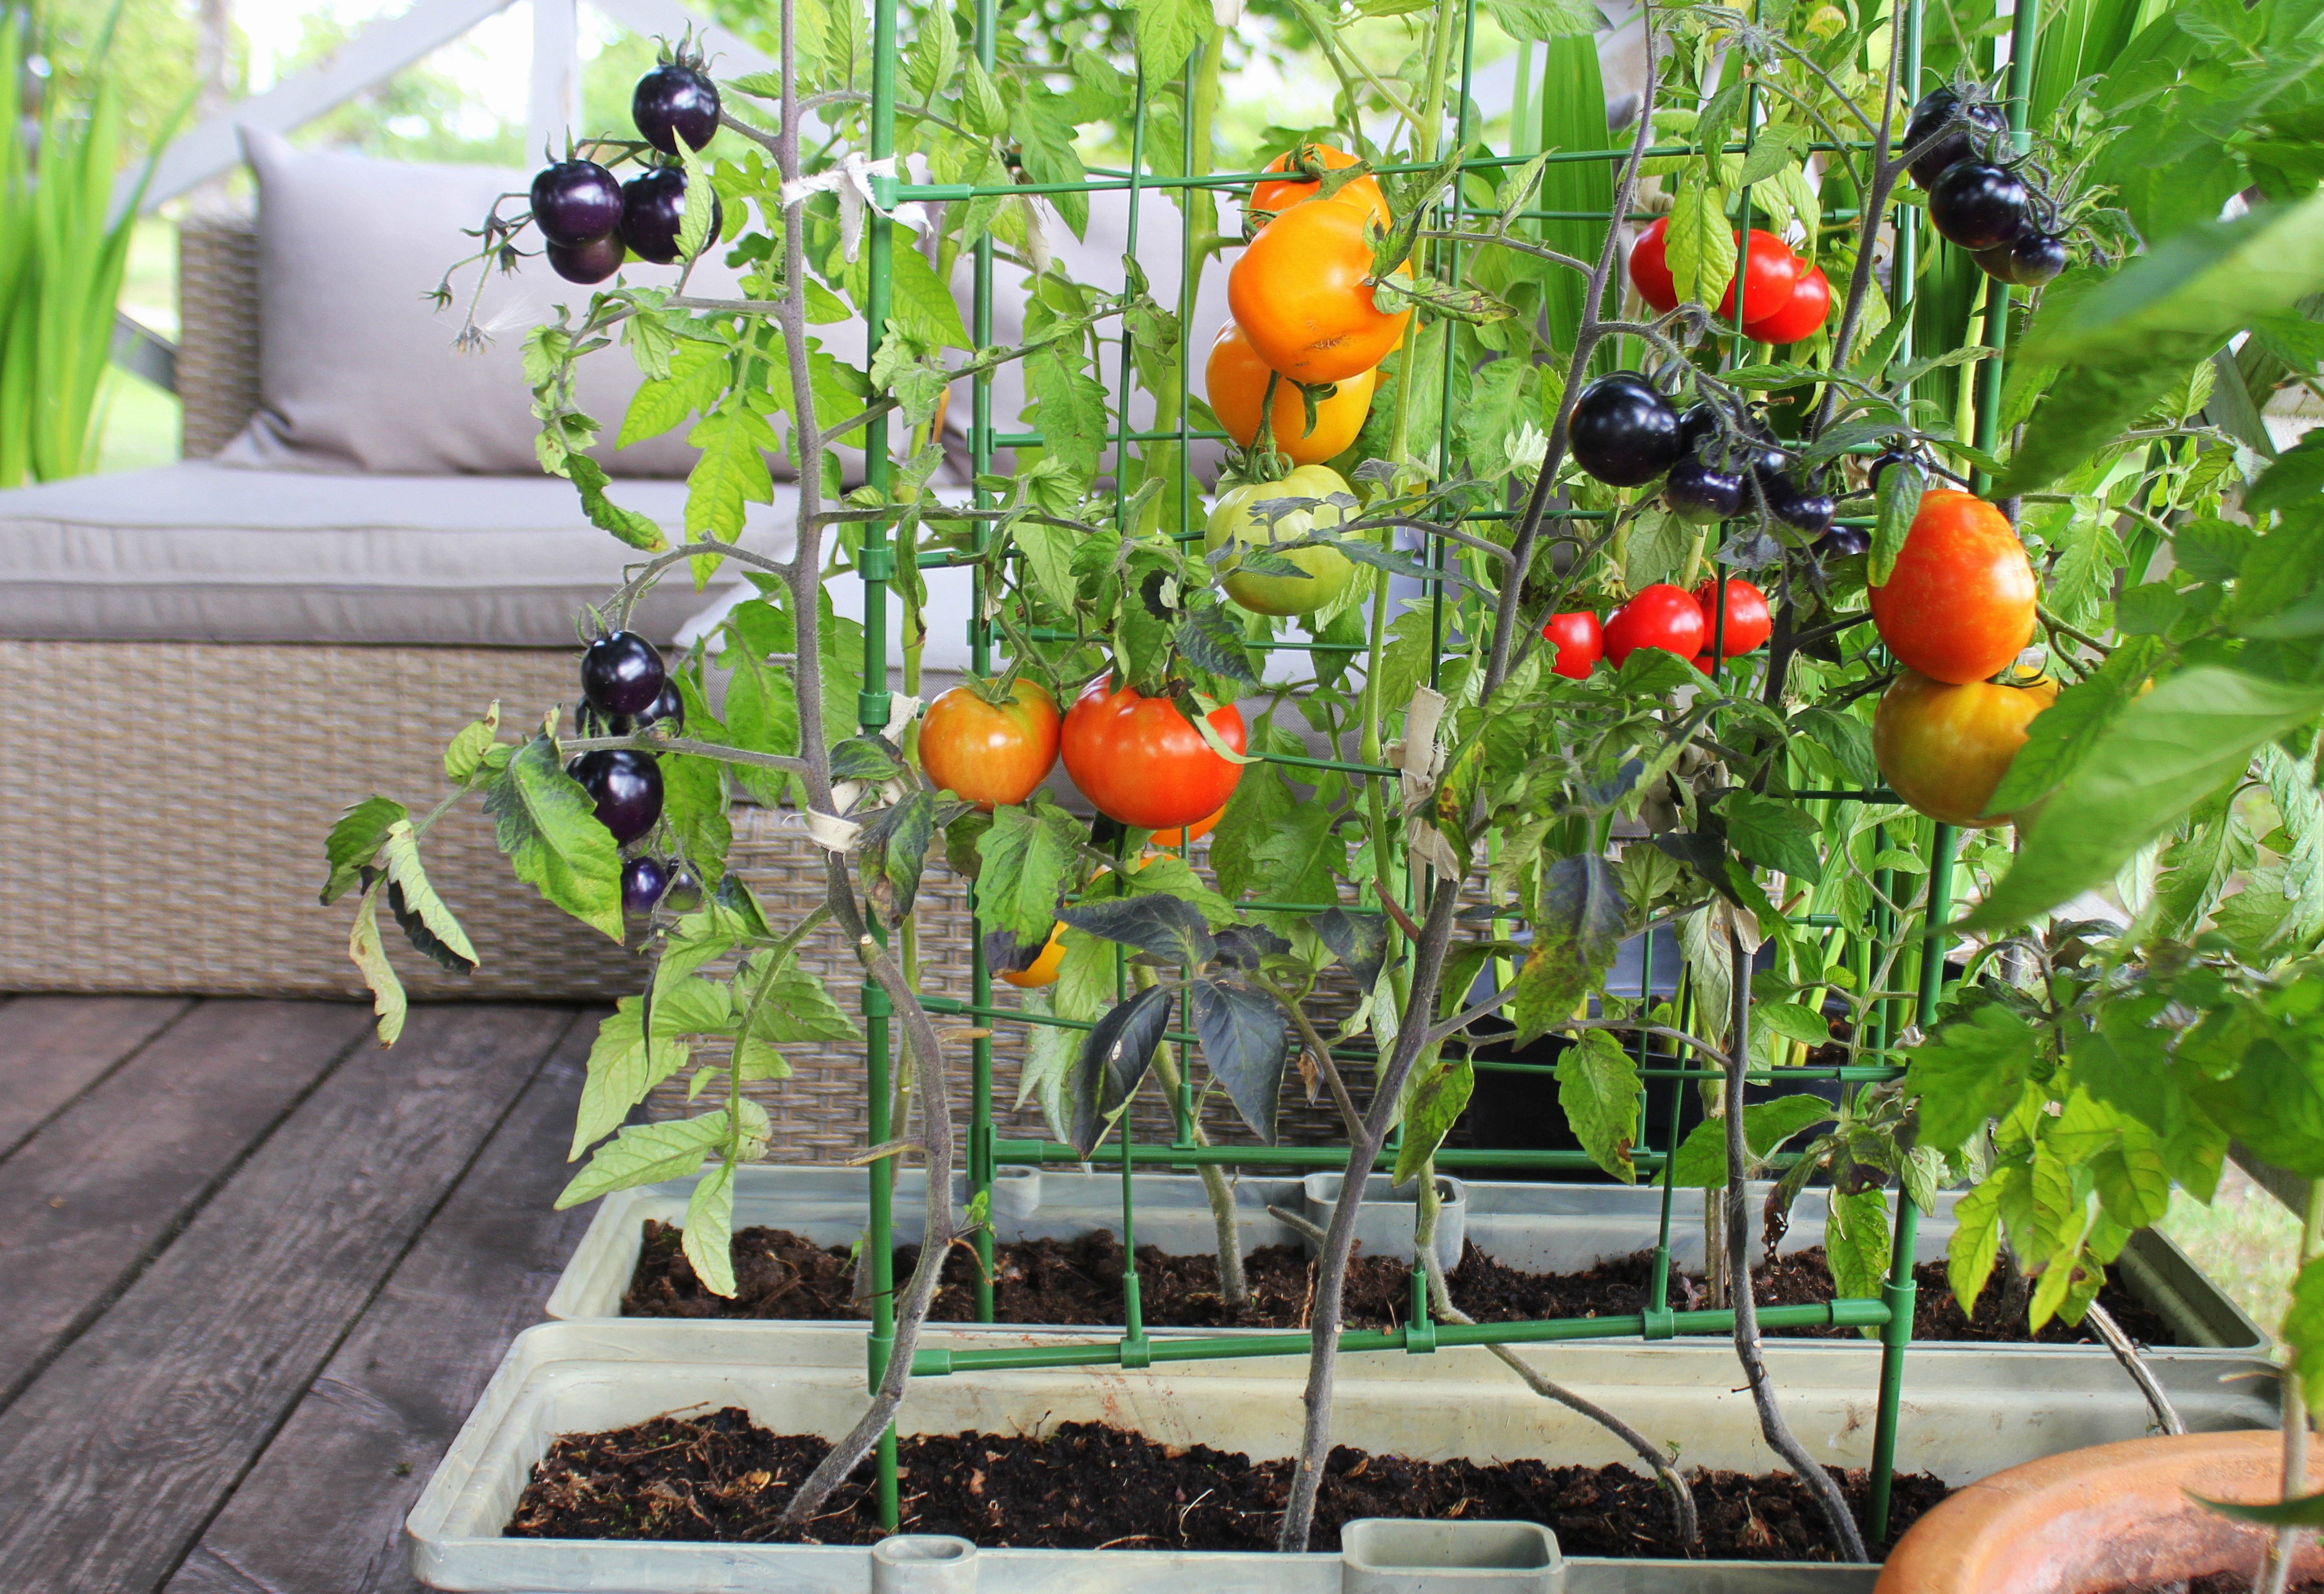 Love the Garden / Tomato / Containers 